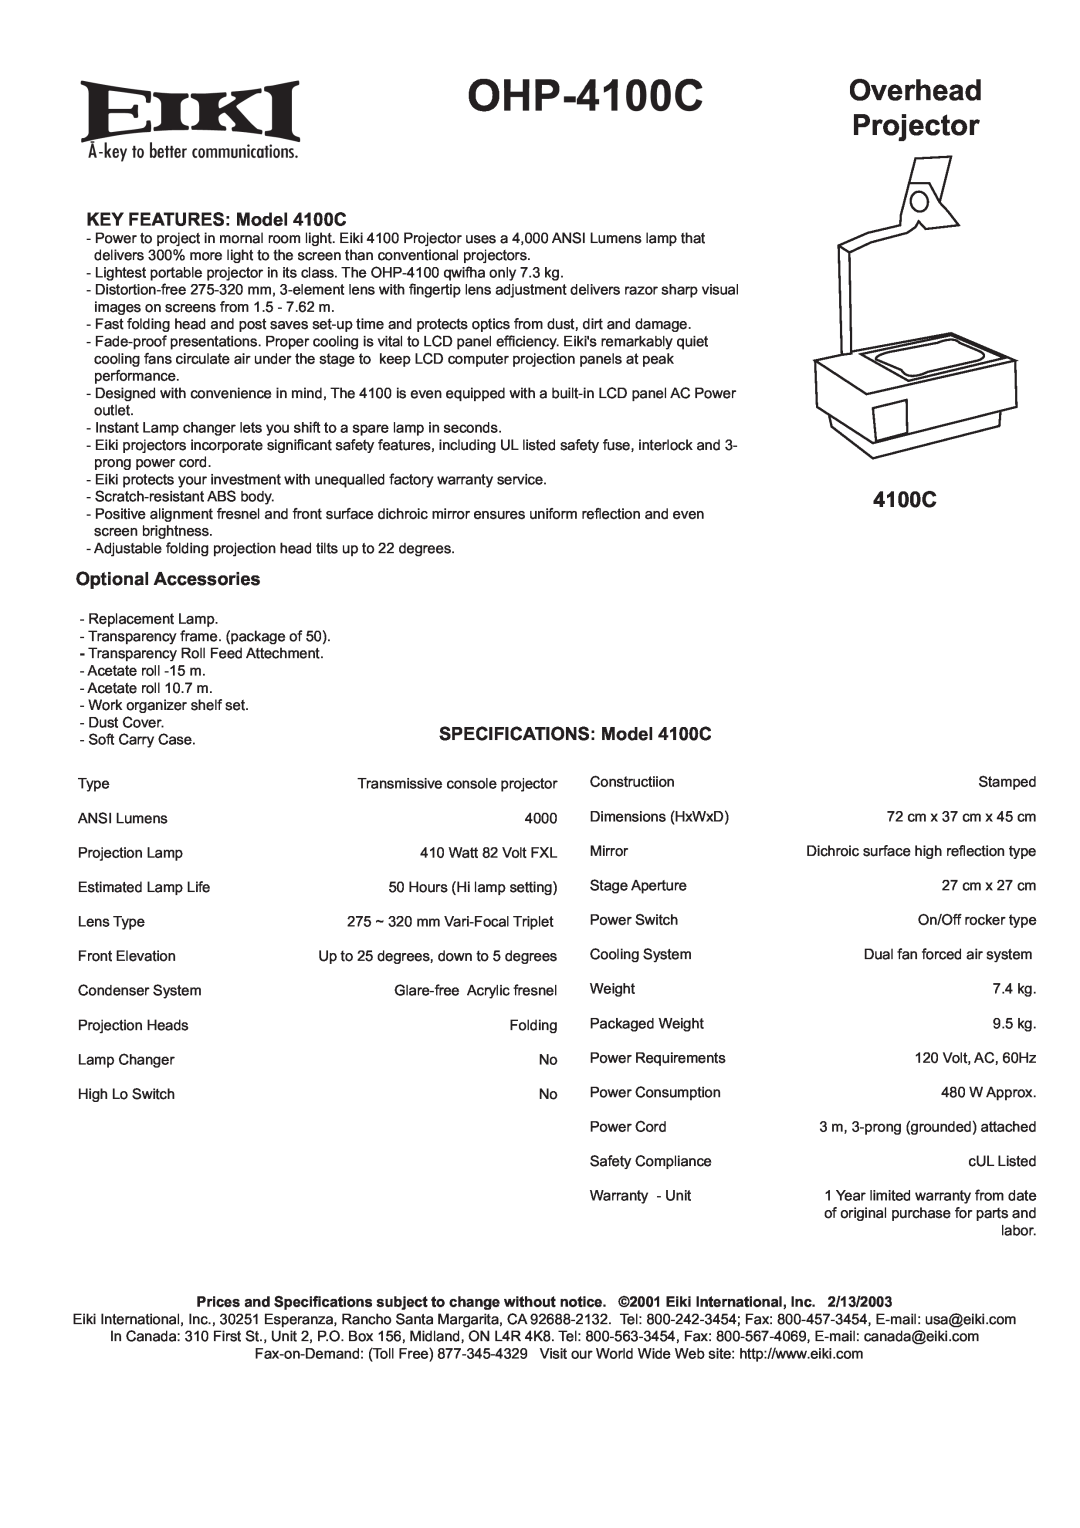 Eiki OHP-4100A specifications OHP-4100C, Overhead Projector, KEY FEATURES Model 4100C, Optional Accessories 